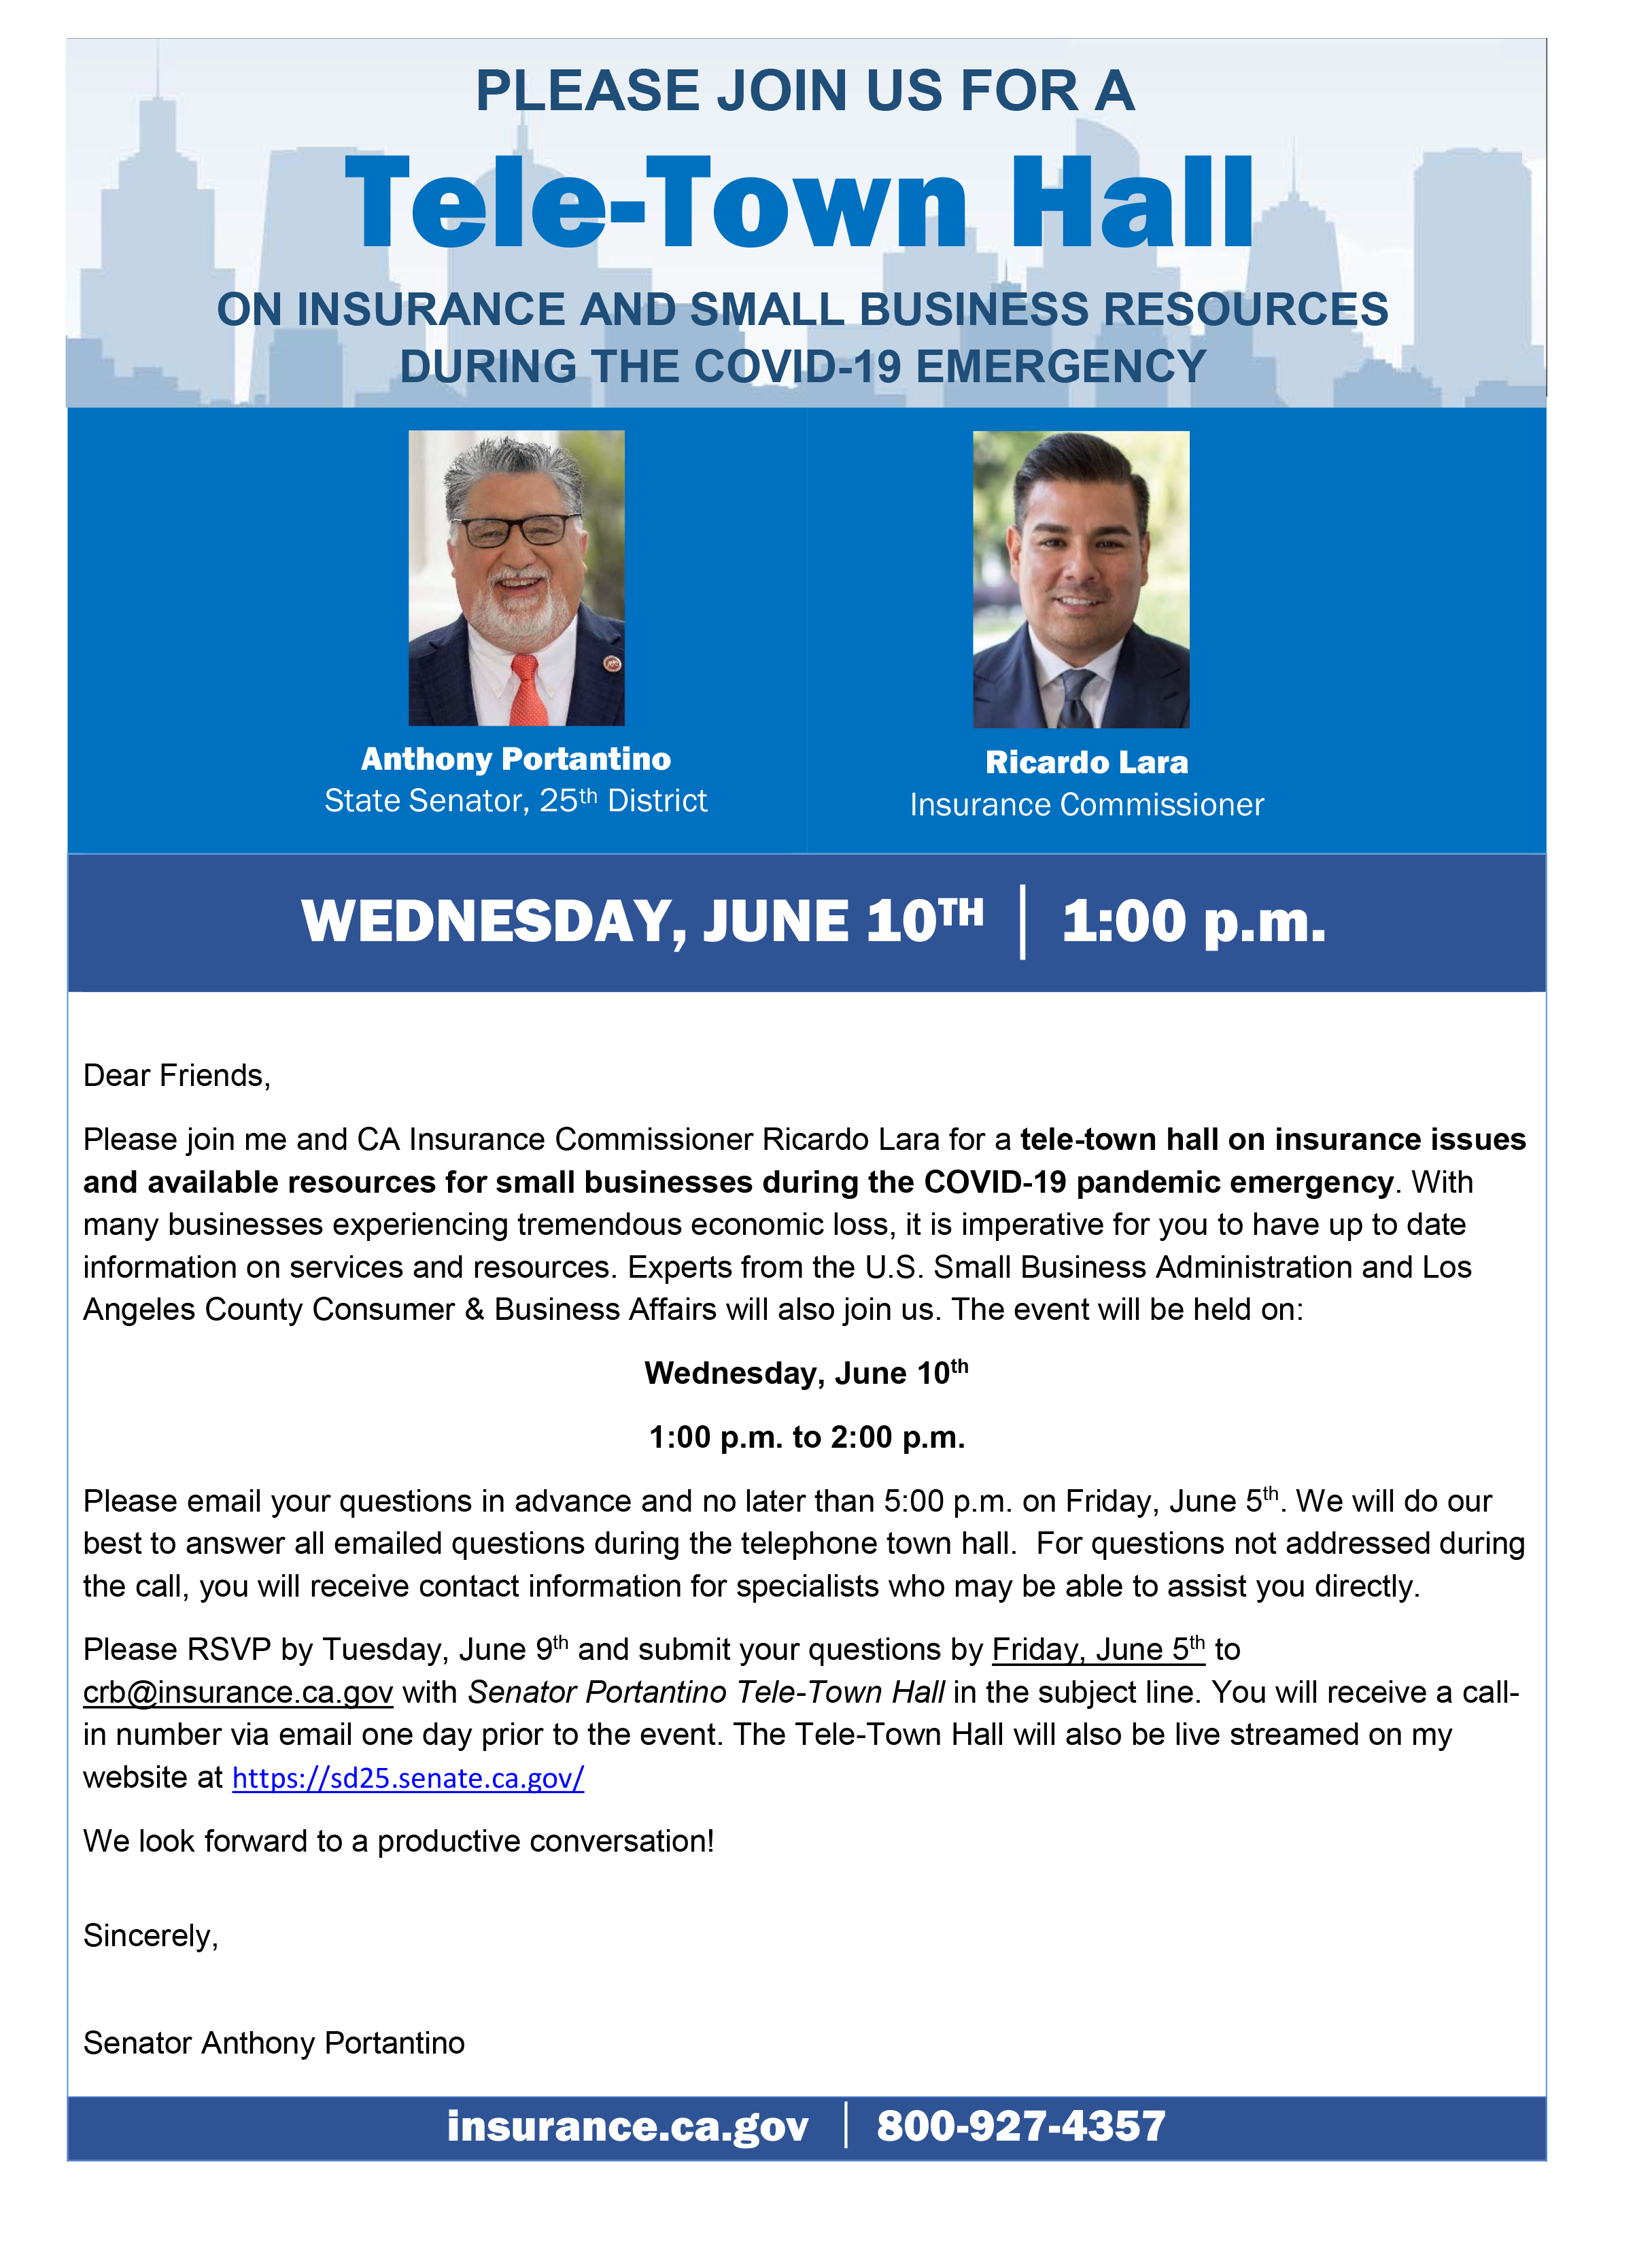 Please join Senator Anthony Portantino and CA Insurance Commissioner Ricardo Lara for a tele-town hall on insurance issues and available resources for small businesses during the COVID-19 pandemic emergency. Experts from the U.S. Small Business Administra